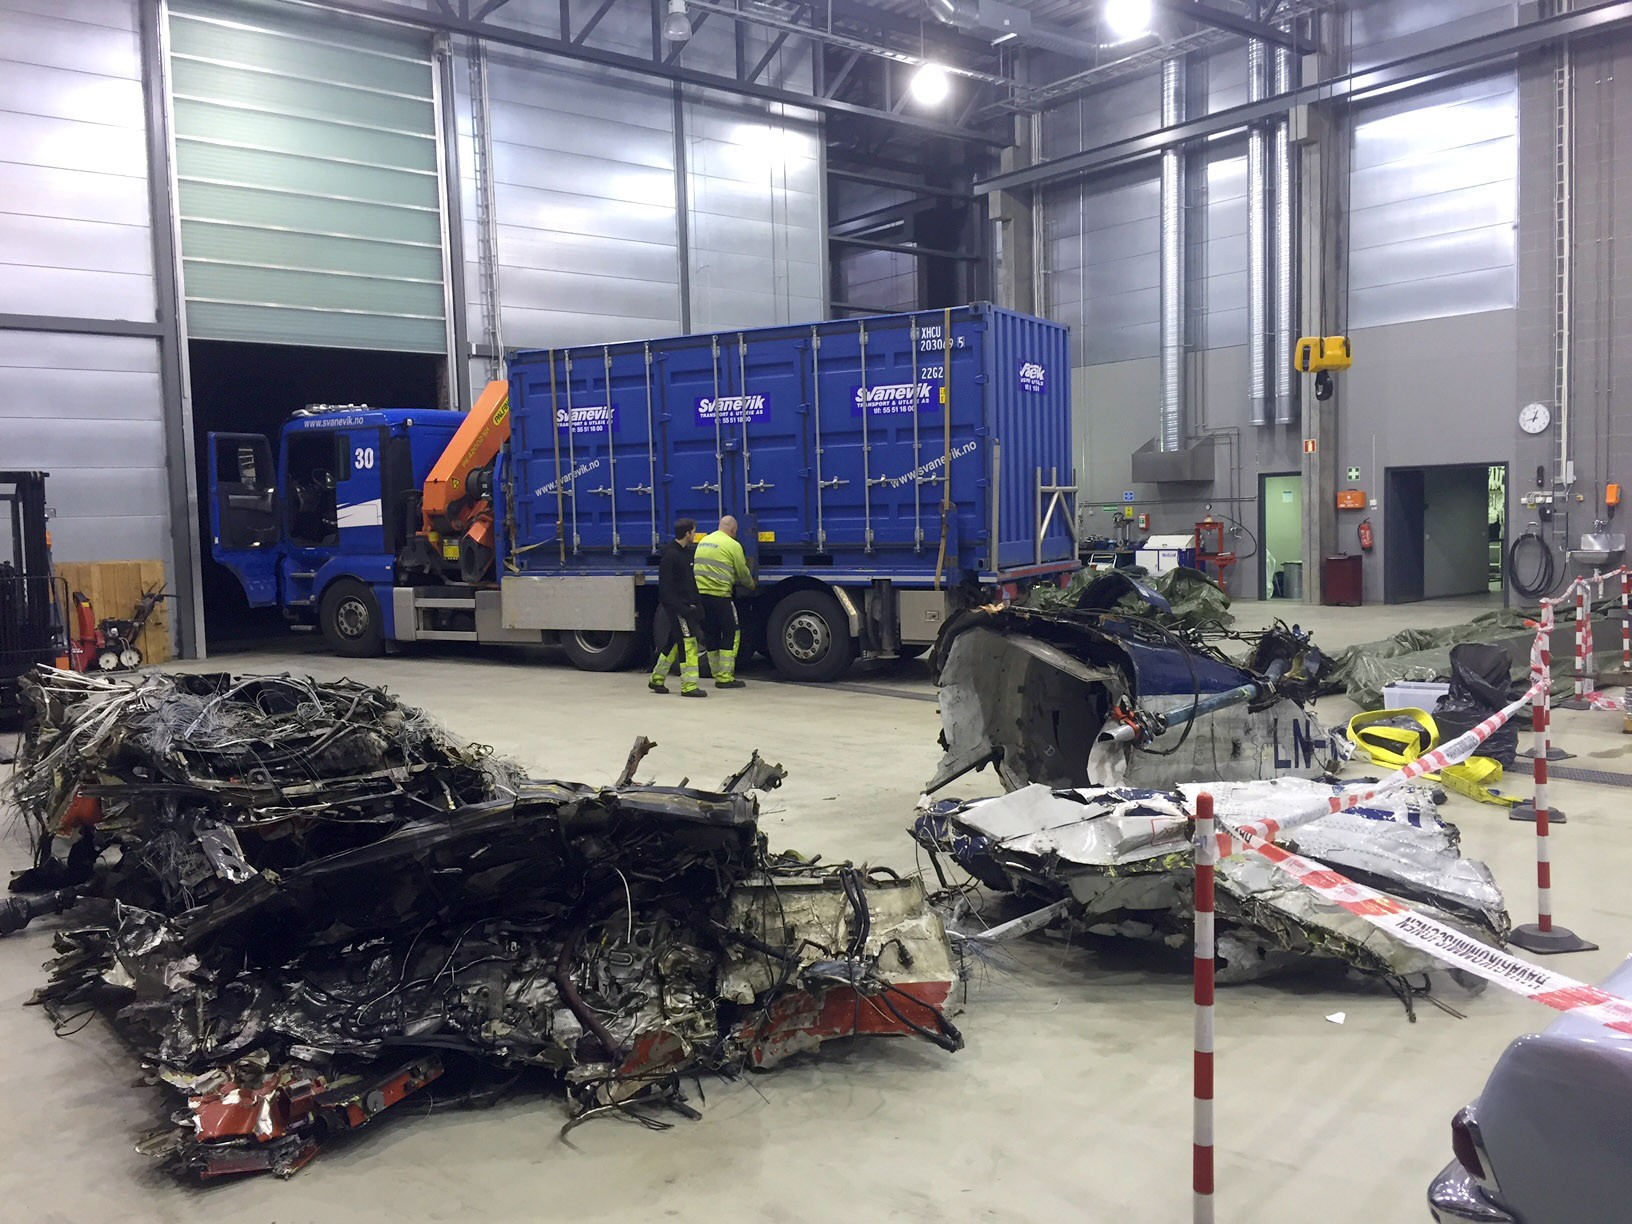 Wreckage from the Super Puma crash in Norway, 2016.